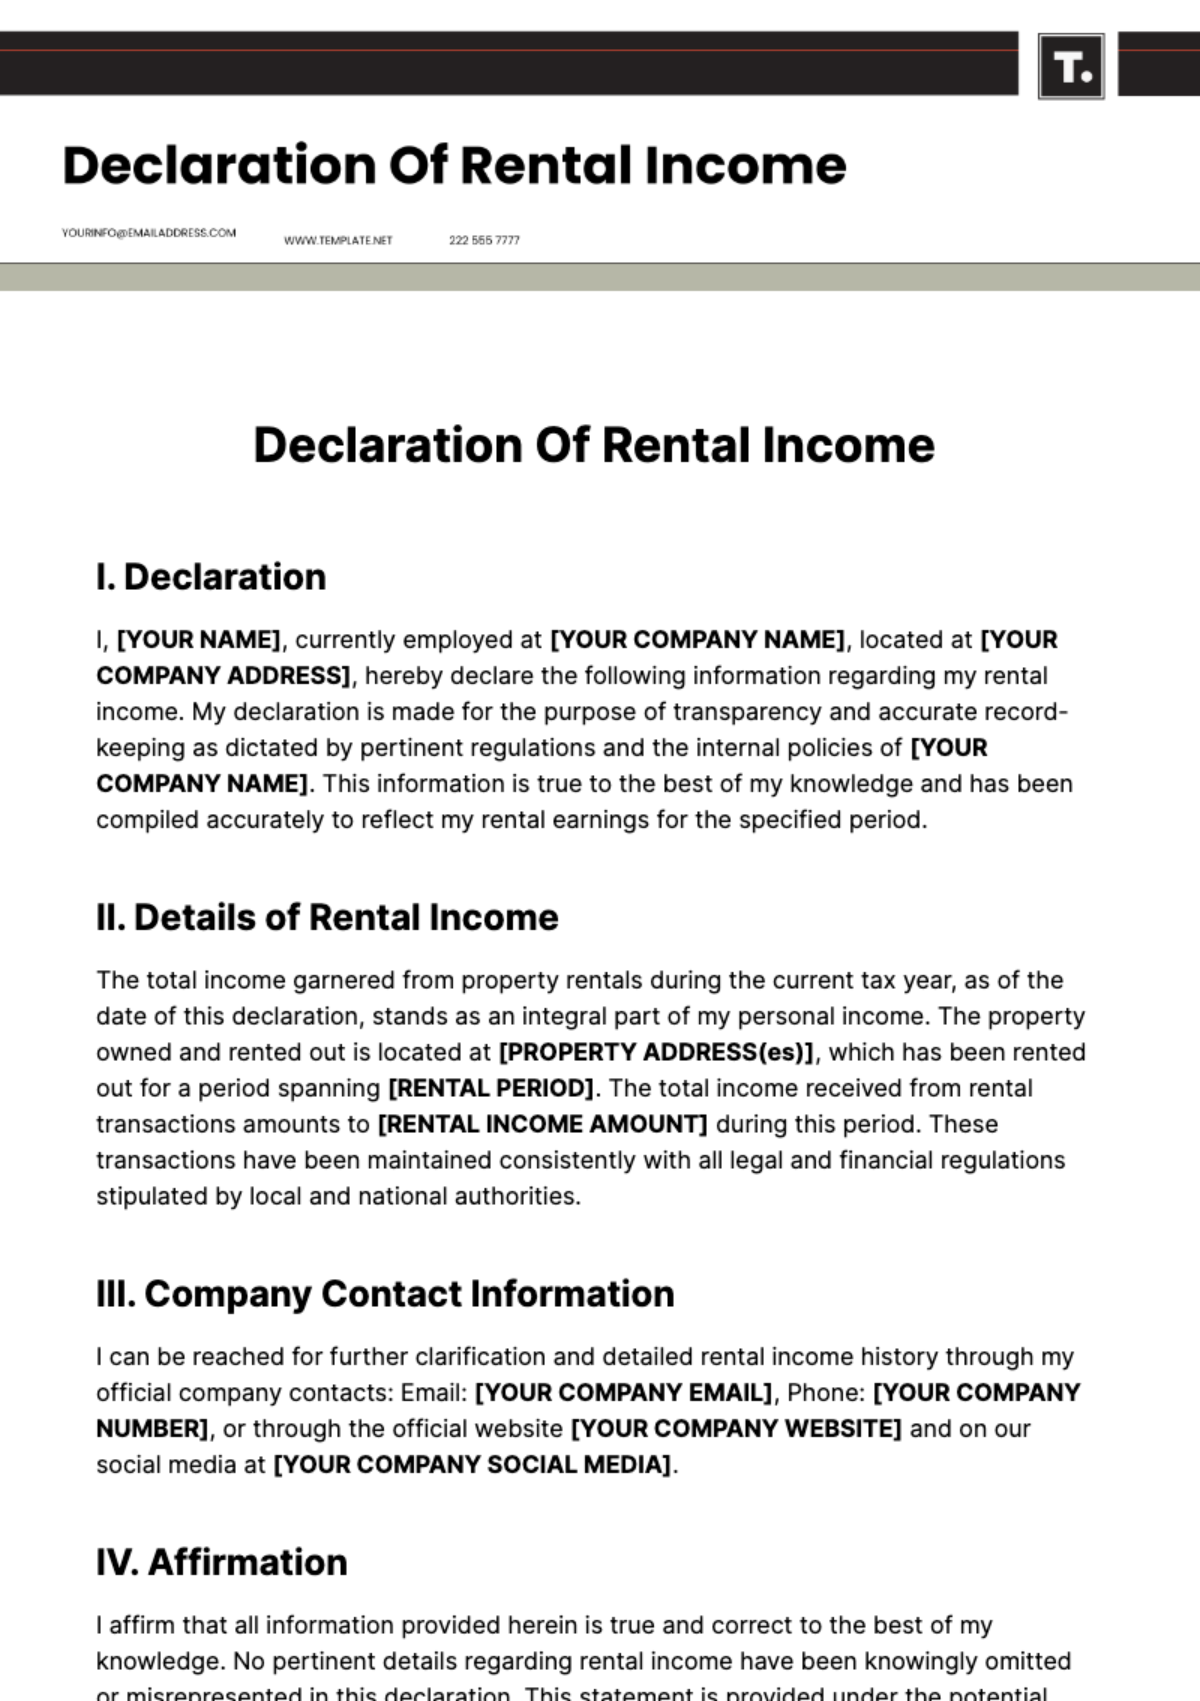 Free Declaration Of Rental Income Template